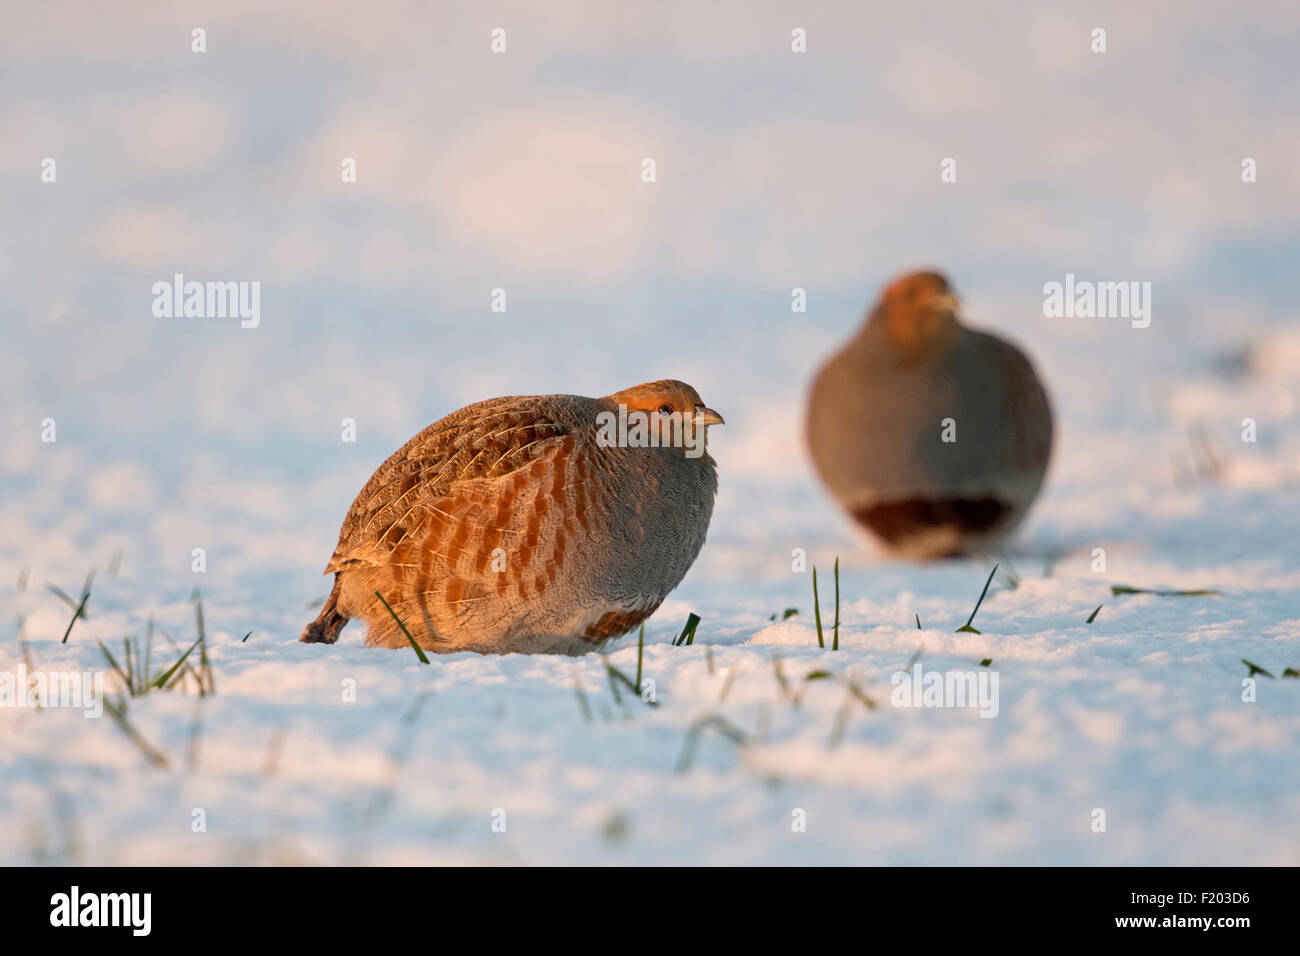 Two Grey partridges / Rebhuehner ( Perdix perdix ) sitting on a snow covered field in sunset light (Germany). Stock Photo